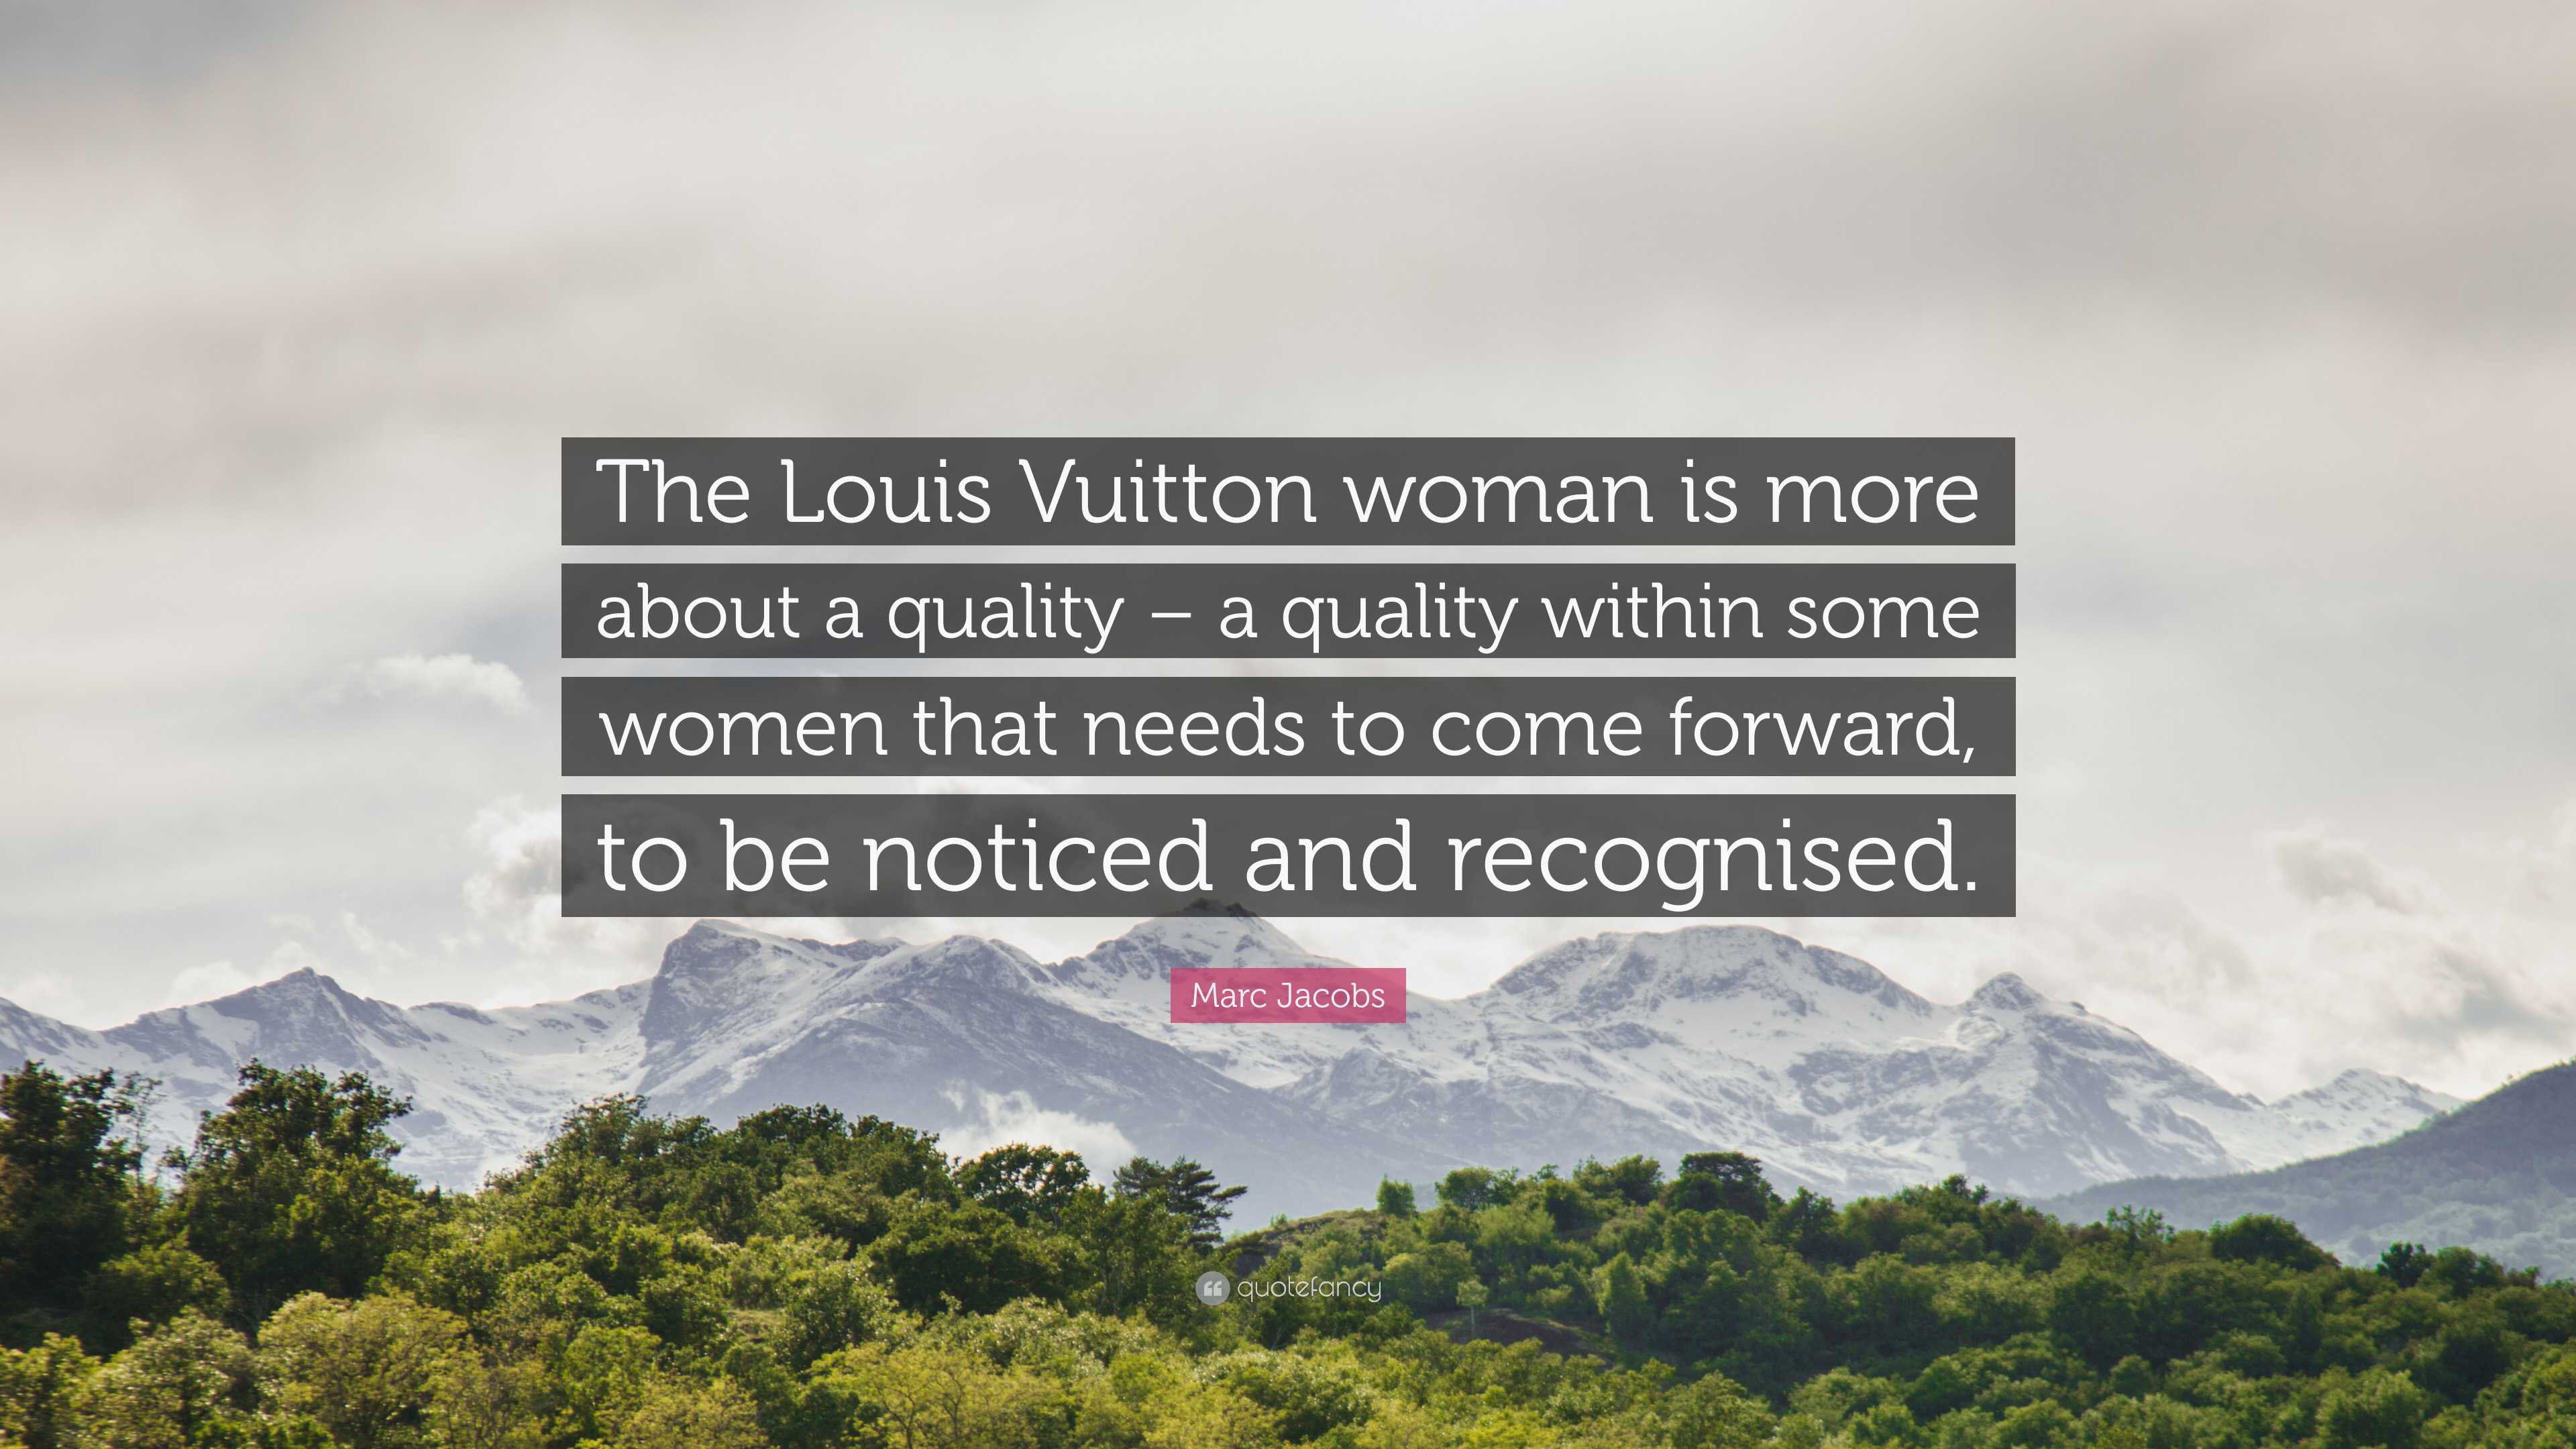 The Louis Vuitton woman is more about a quality — a quality within